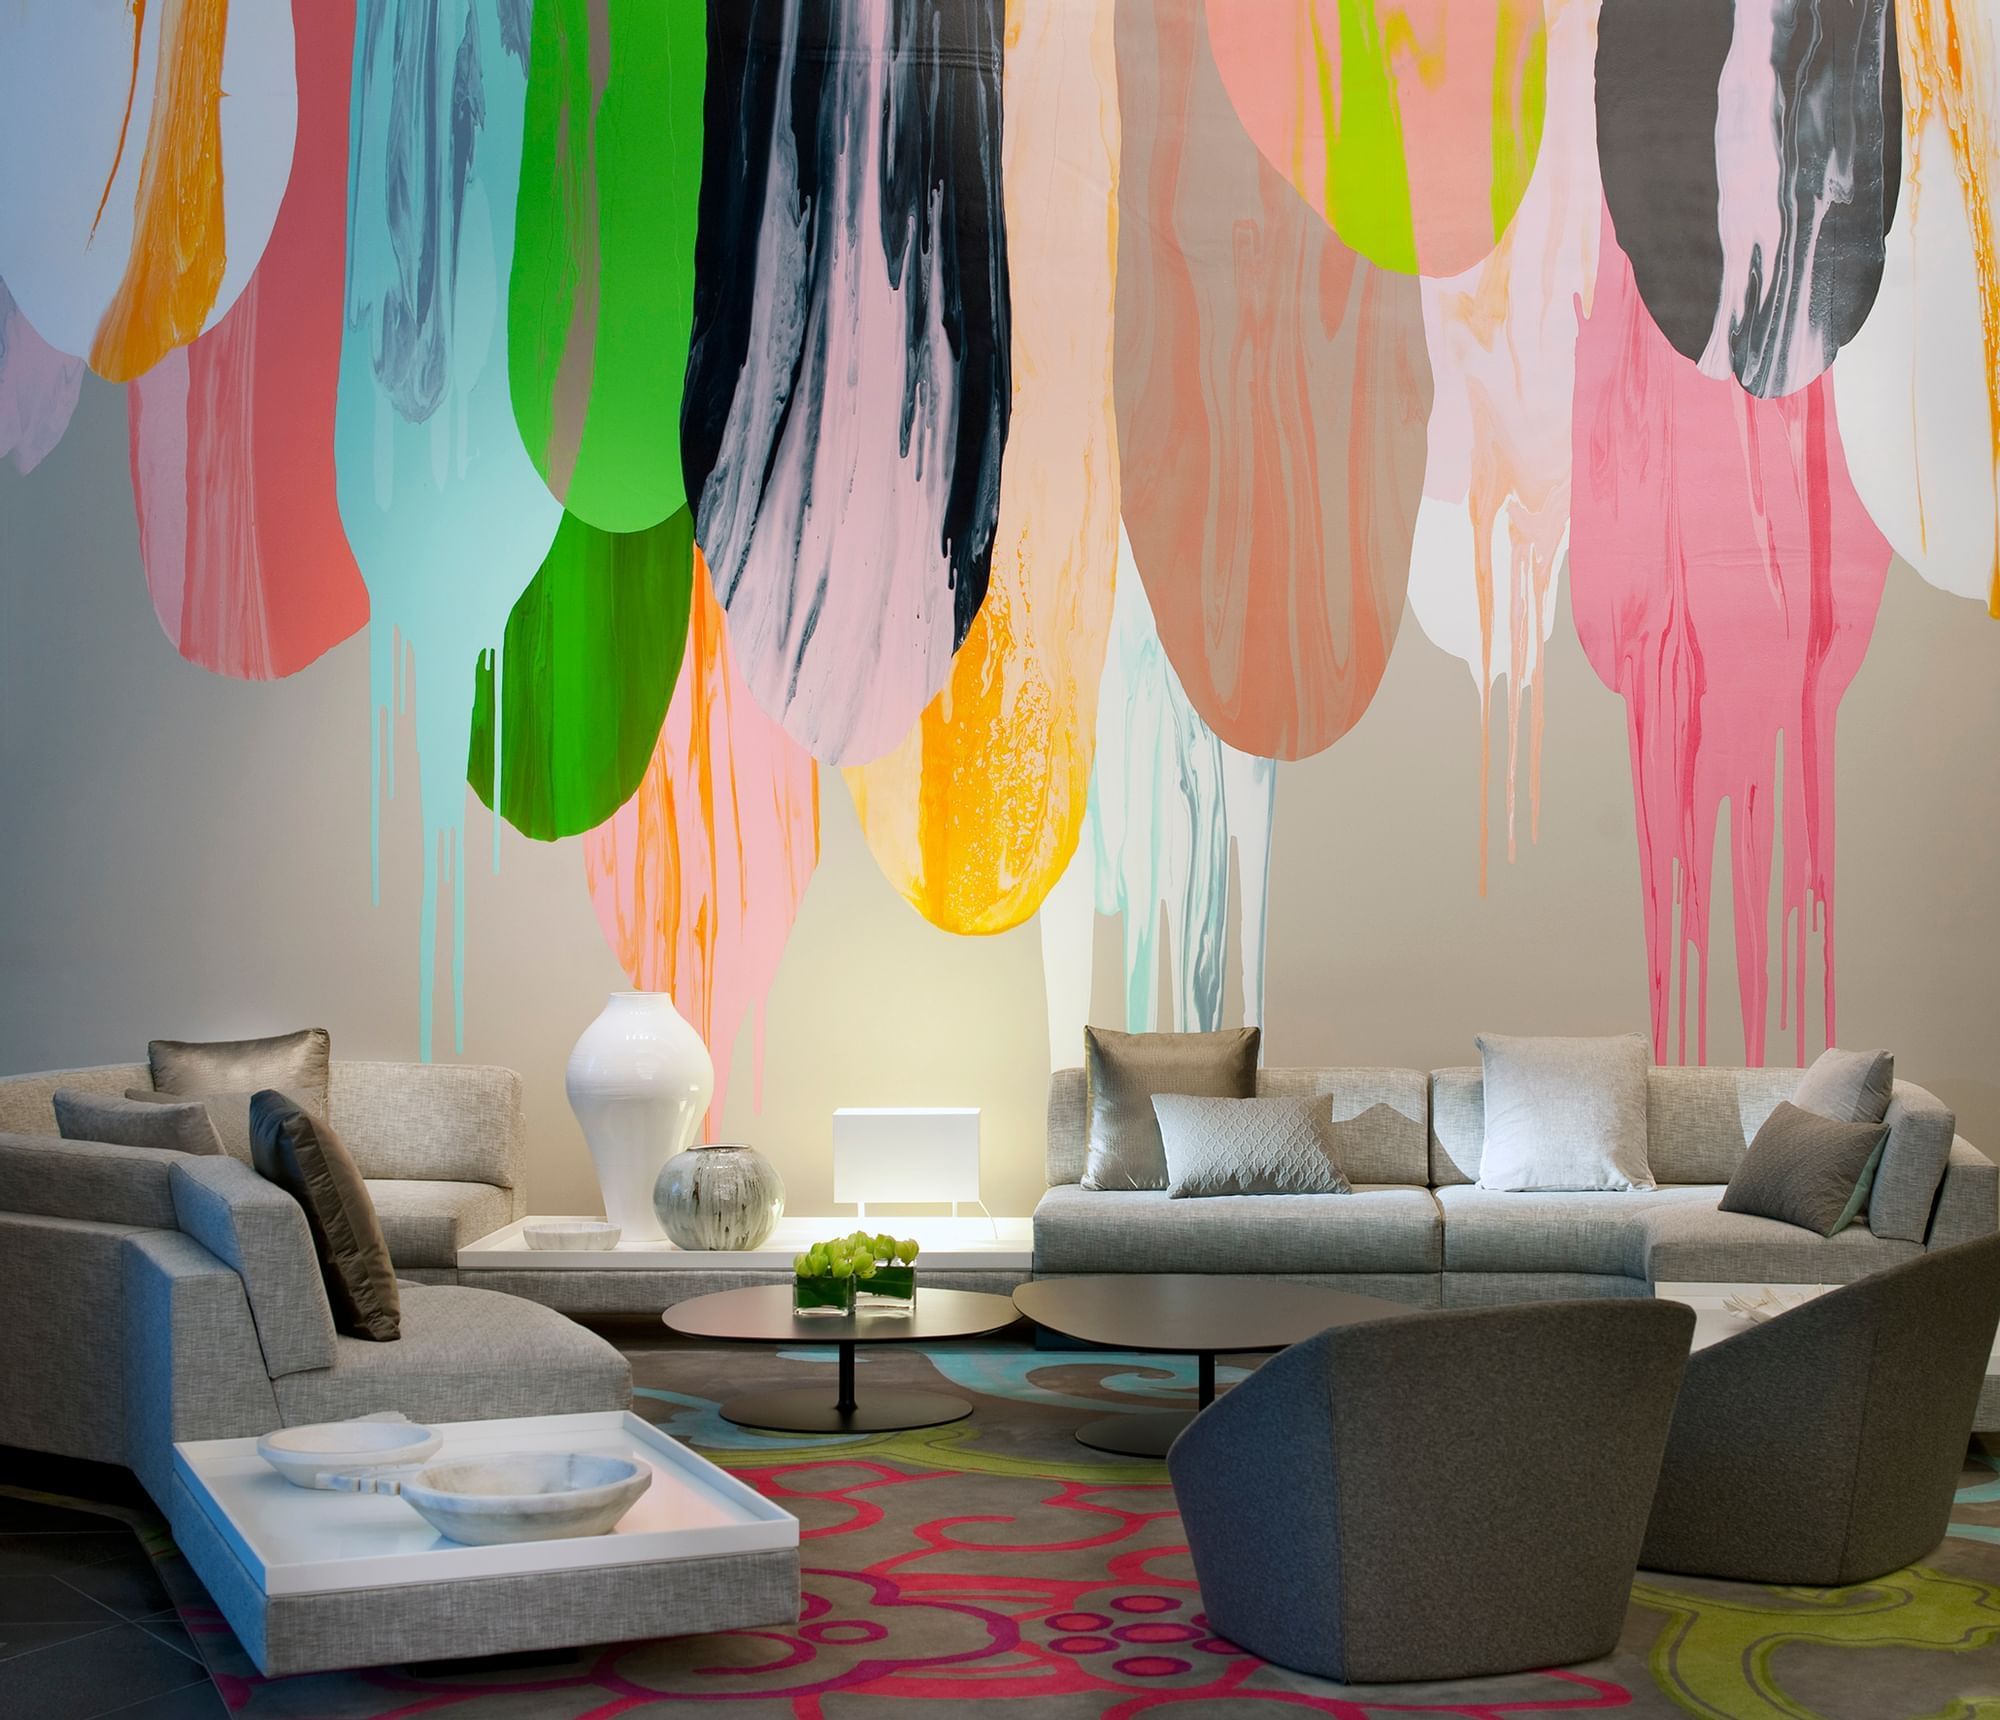 Lobby area with iconic wall art at Crown Towers Melbourne